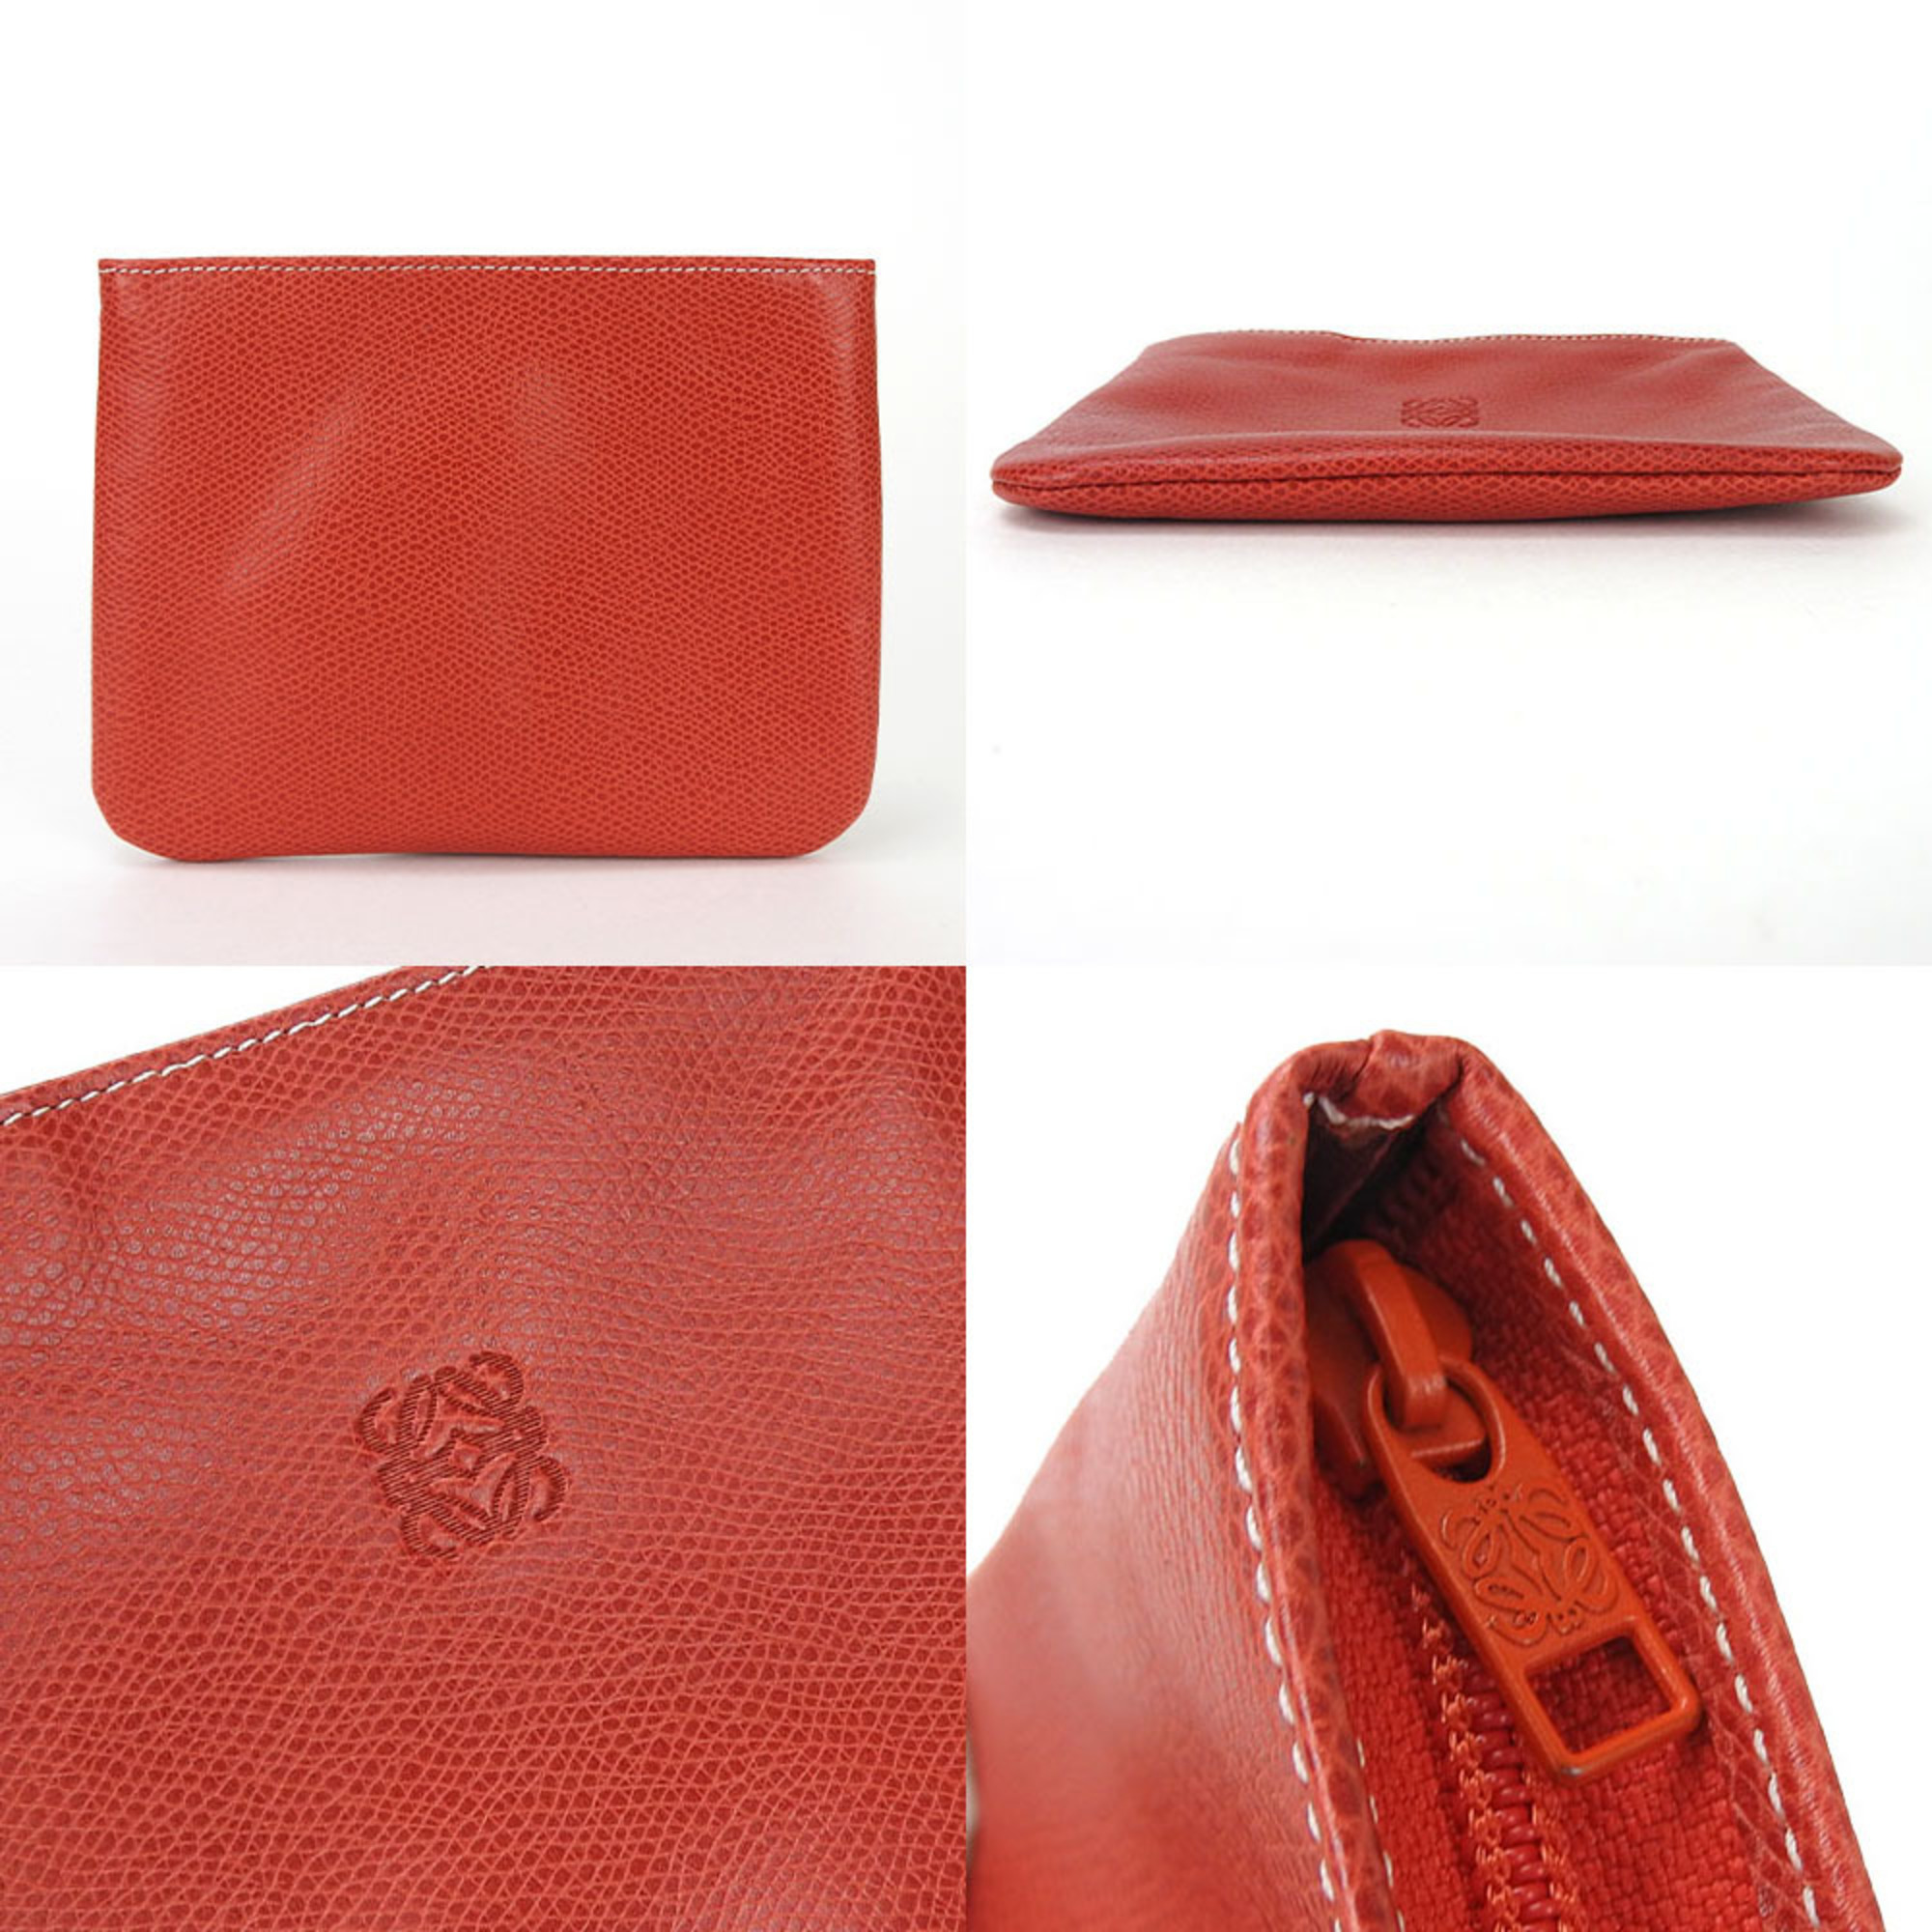 LOEWE pouch leather anagram red ladies accessories